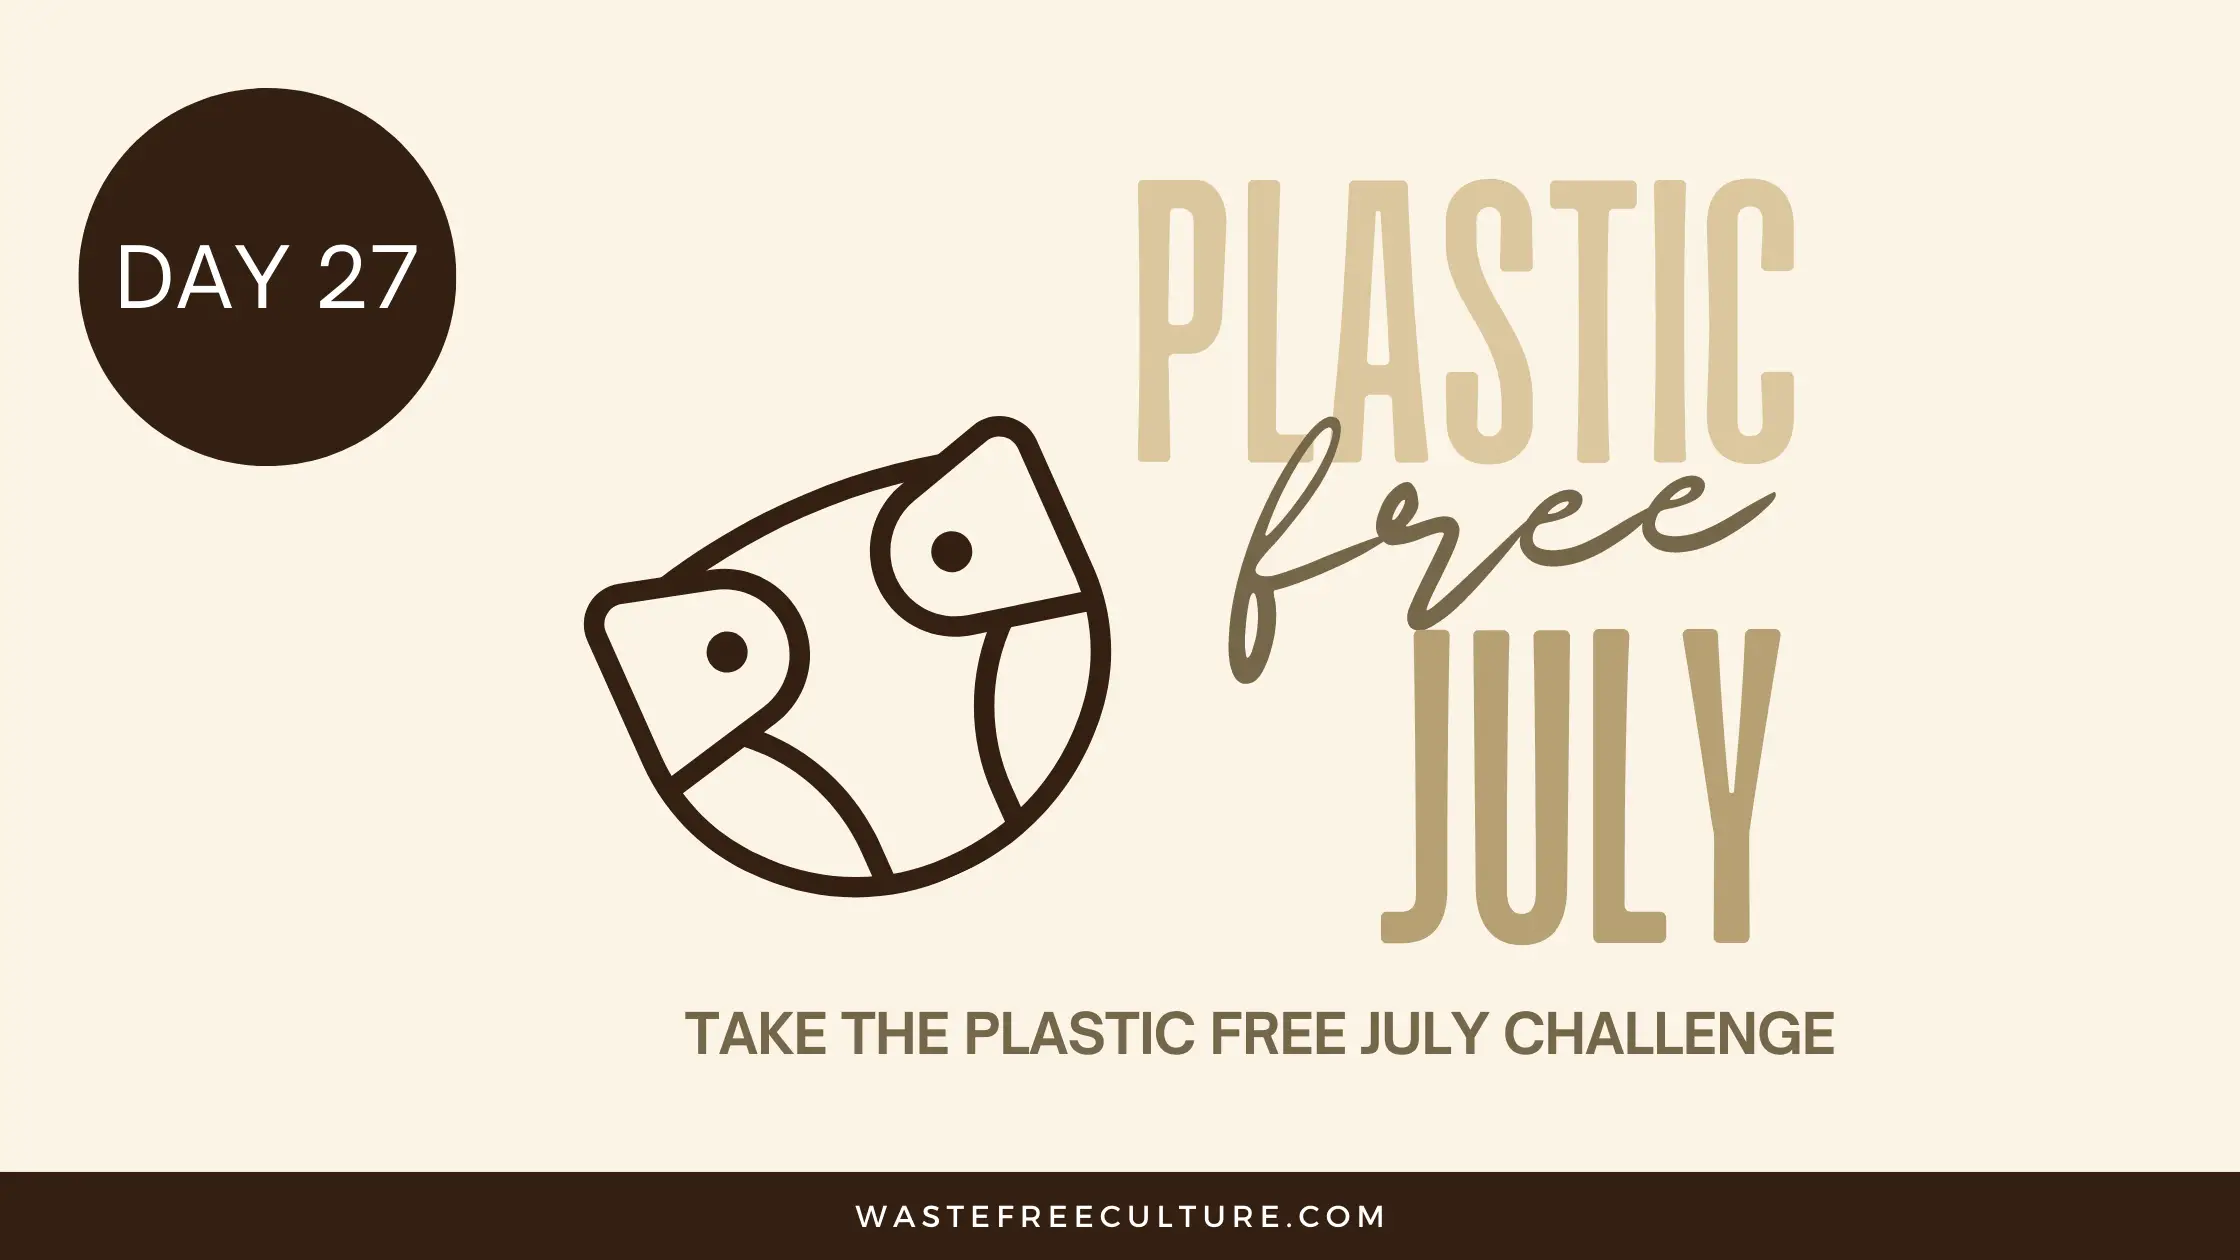 Day 27 of the Plastic Free July Challenge